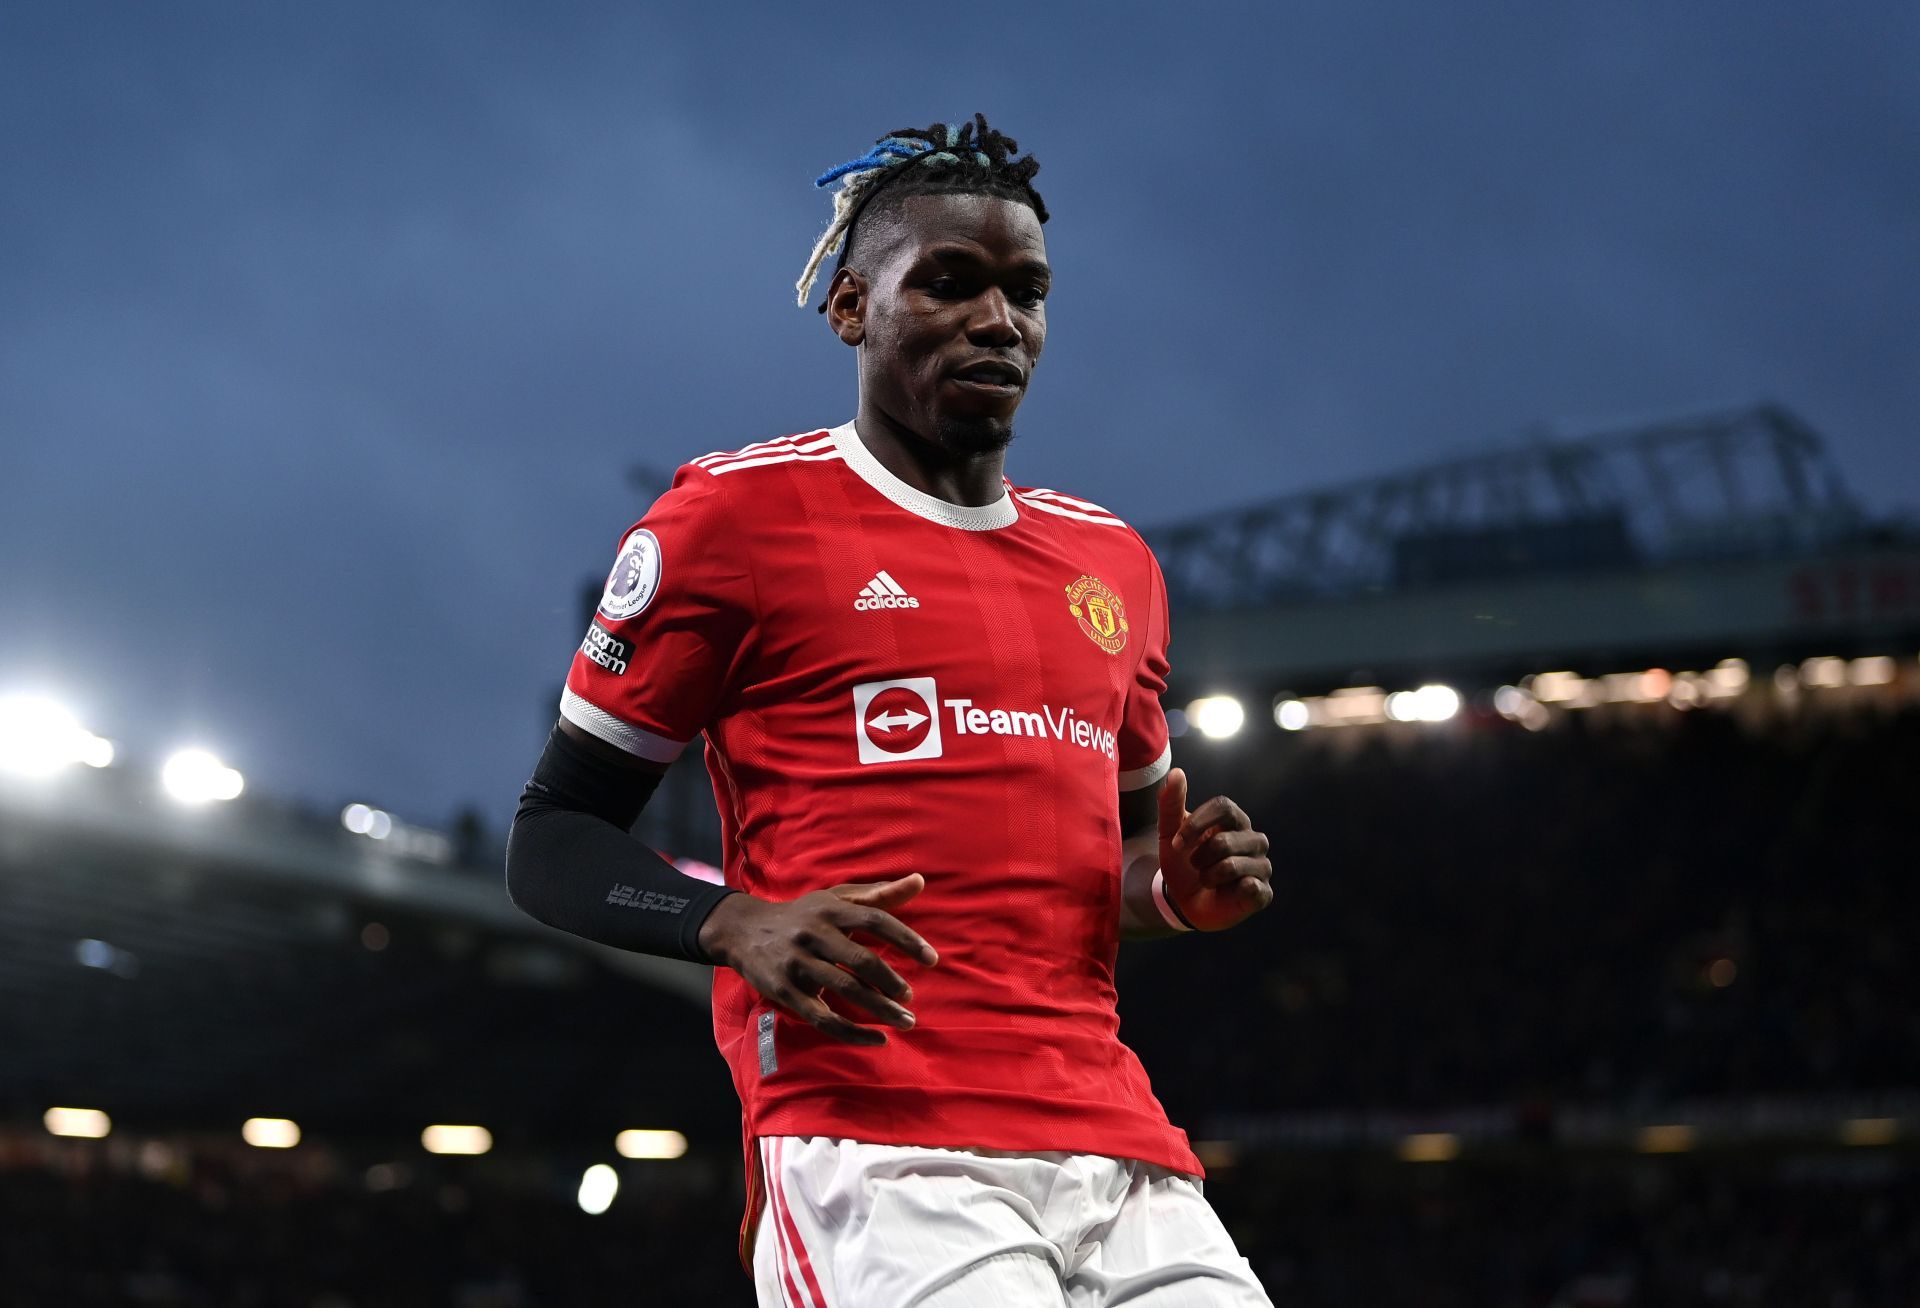 Paul Pogba has informed Manchester United that he wants to join Real Madrid.